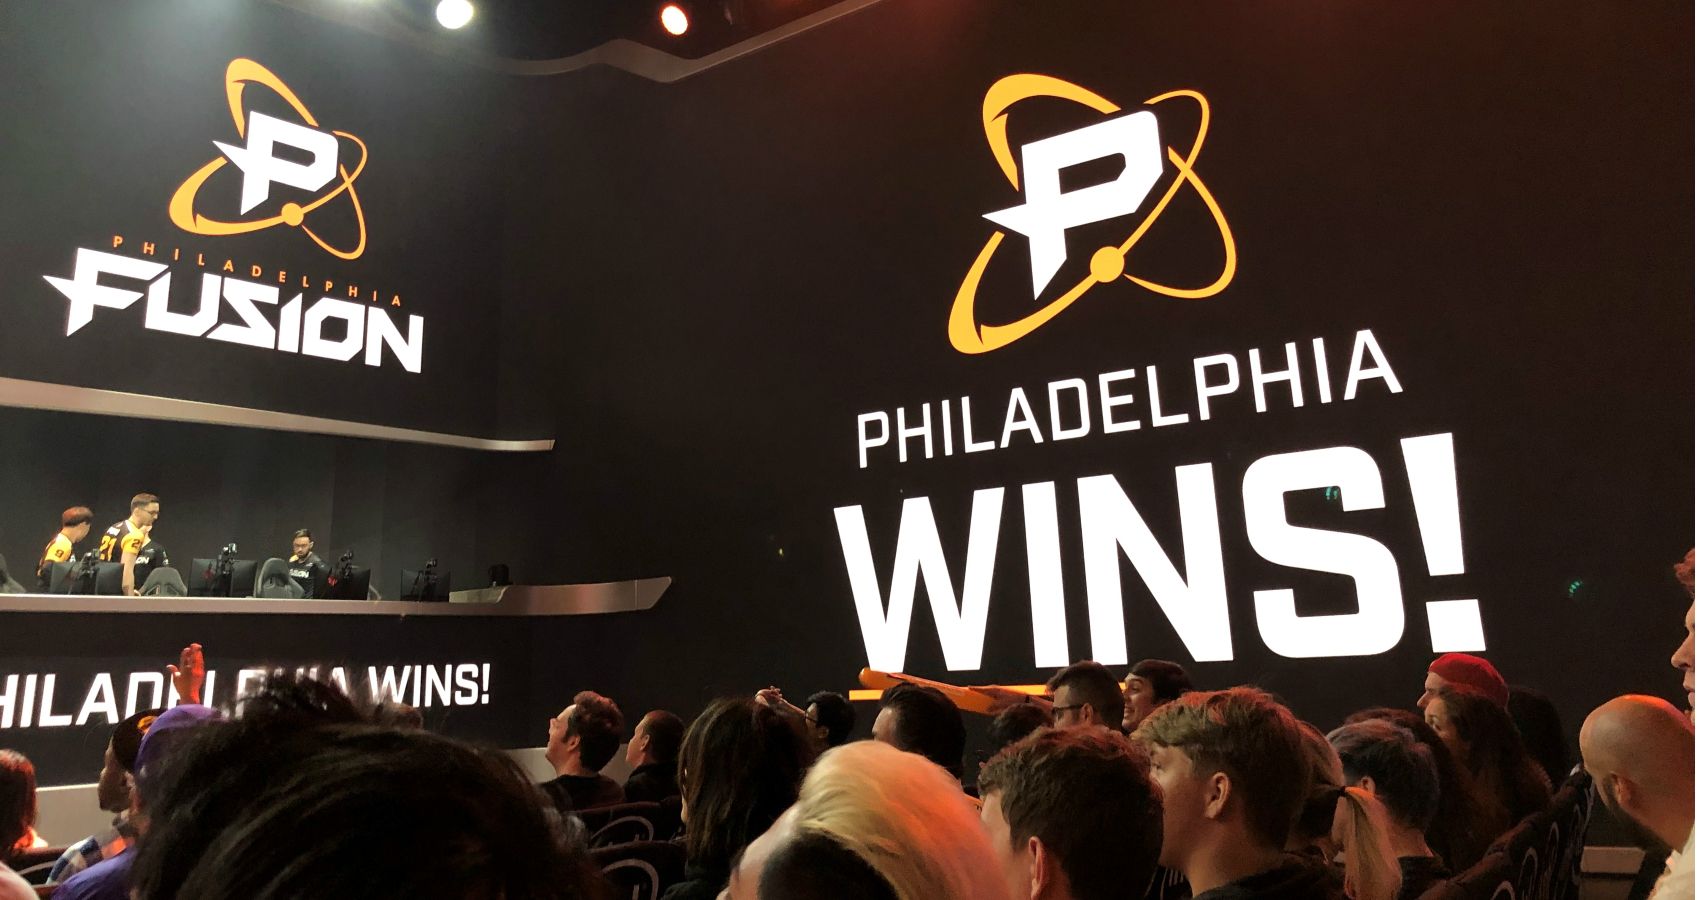 Philadelphia Fusion Bounce Back And Move Up In The Season Standings